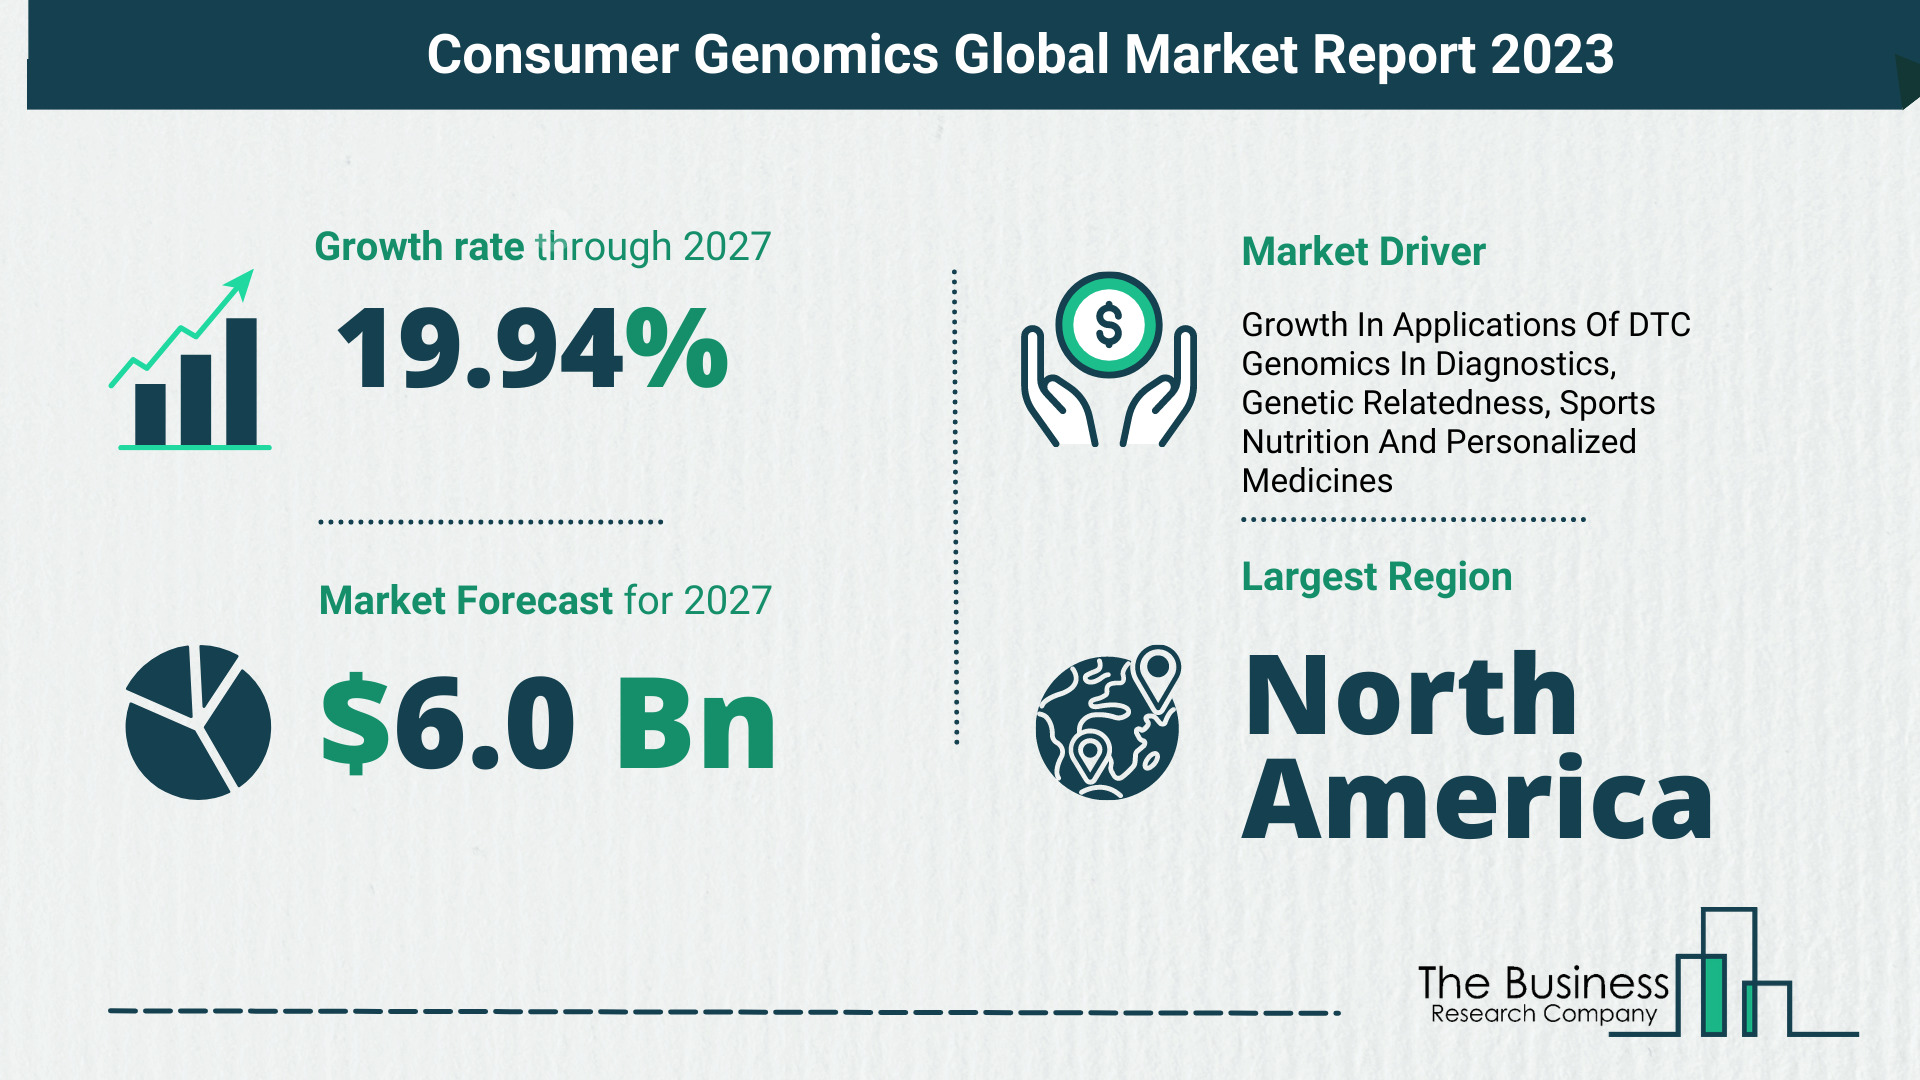 What Will The Consumer Genomics Market Look Like In 2023?